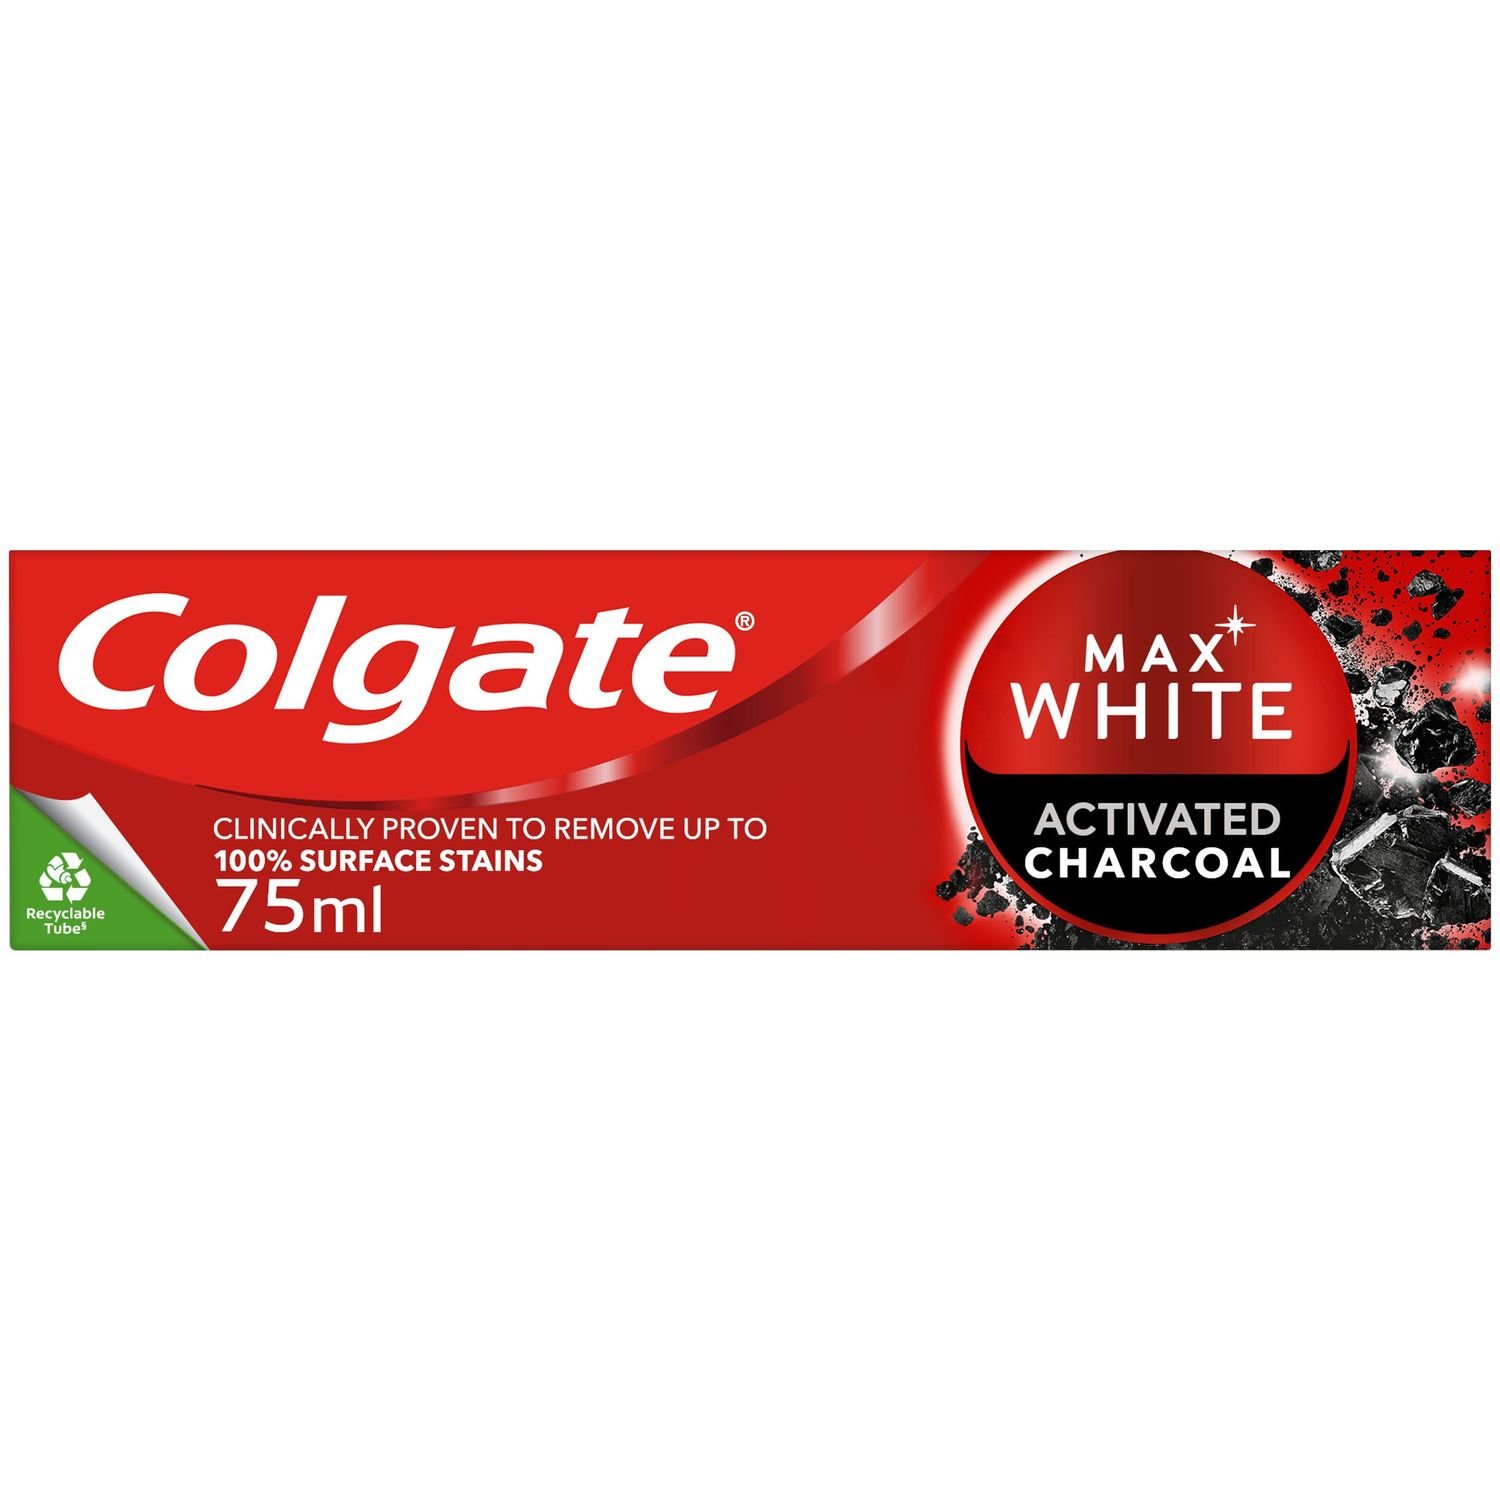 Зубная паста Colgate Max White Activated Charcoal 75 мл - фото 4